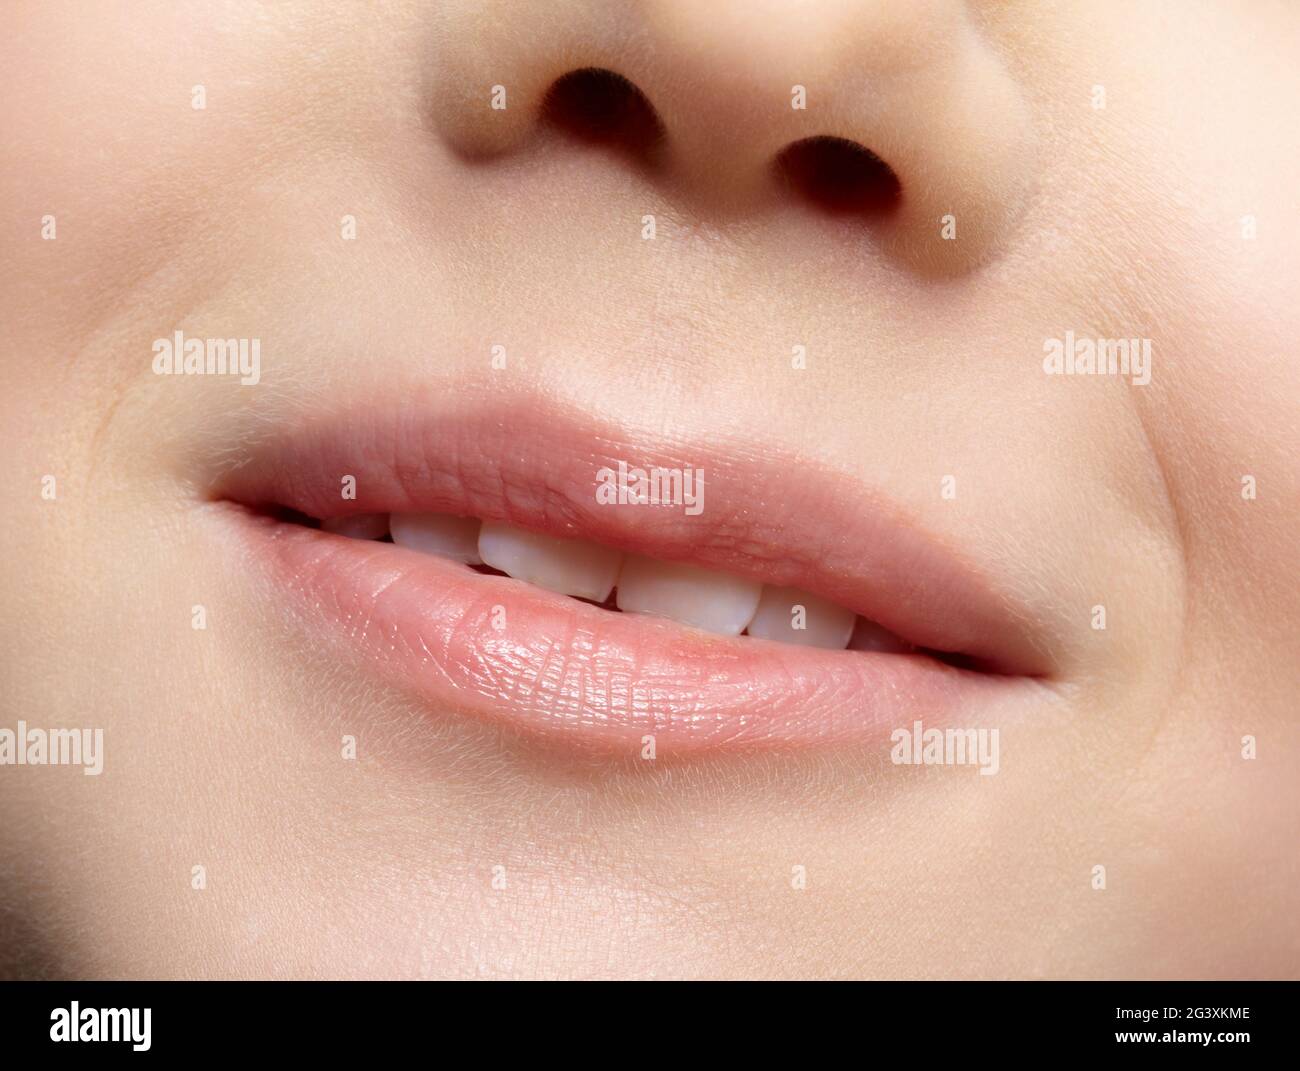 Human mouth and nose. Closeup macro portrait of young female teenager part of face Stock Photo